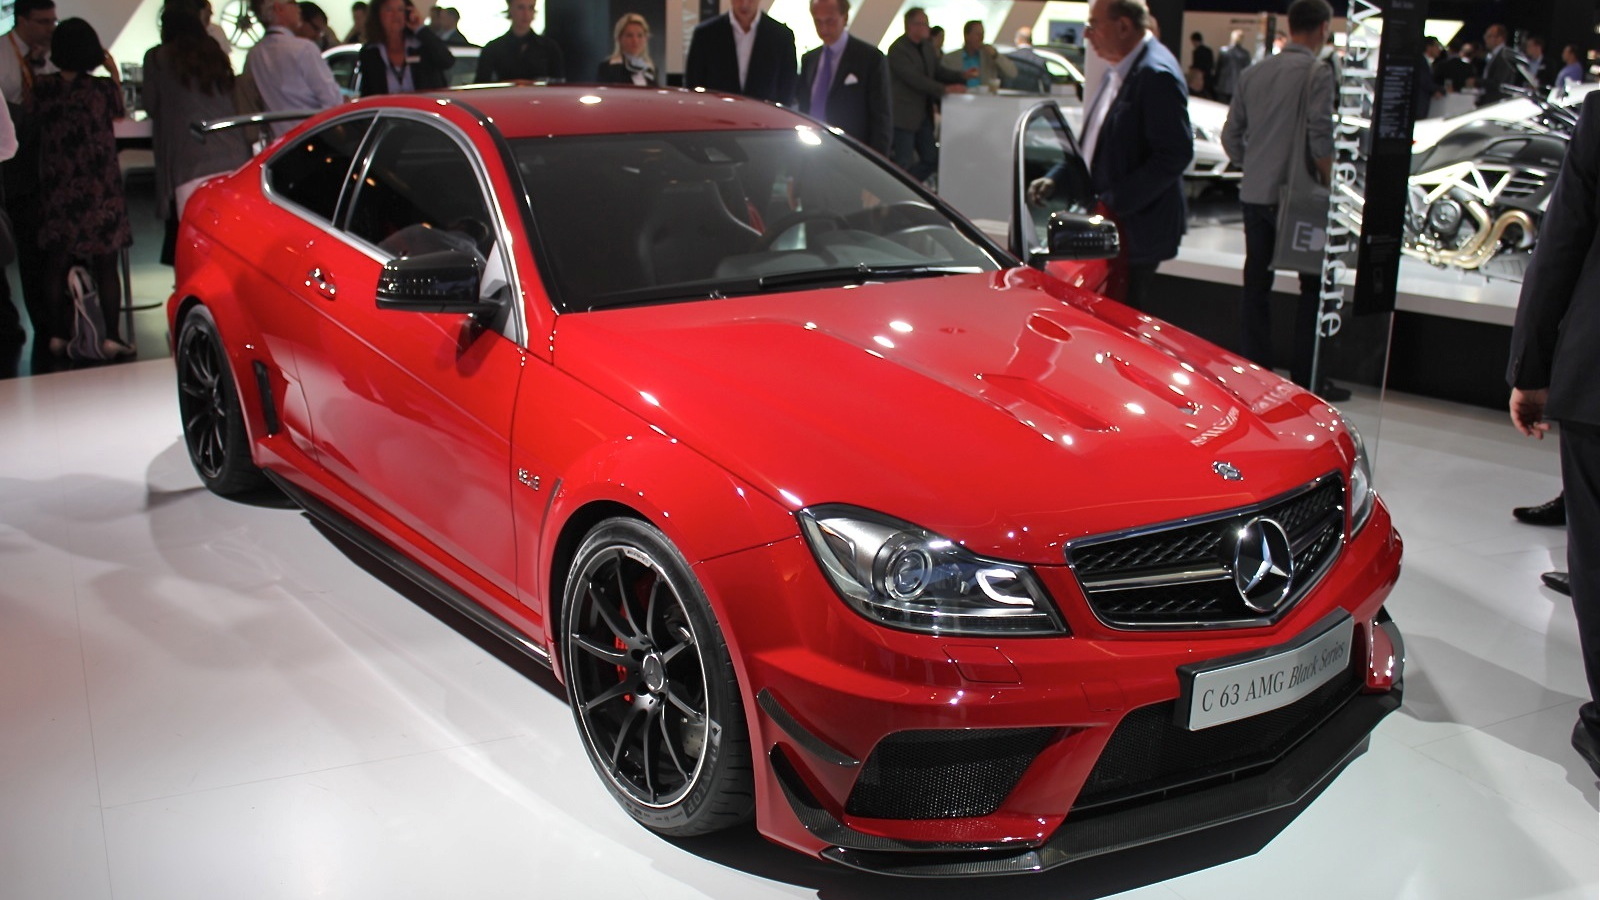 2012 C63 AMG Coupe Black Series With Aero Package: Video